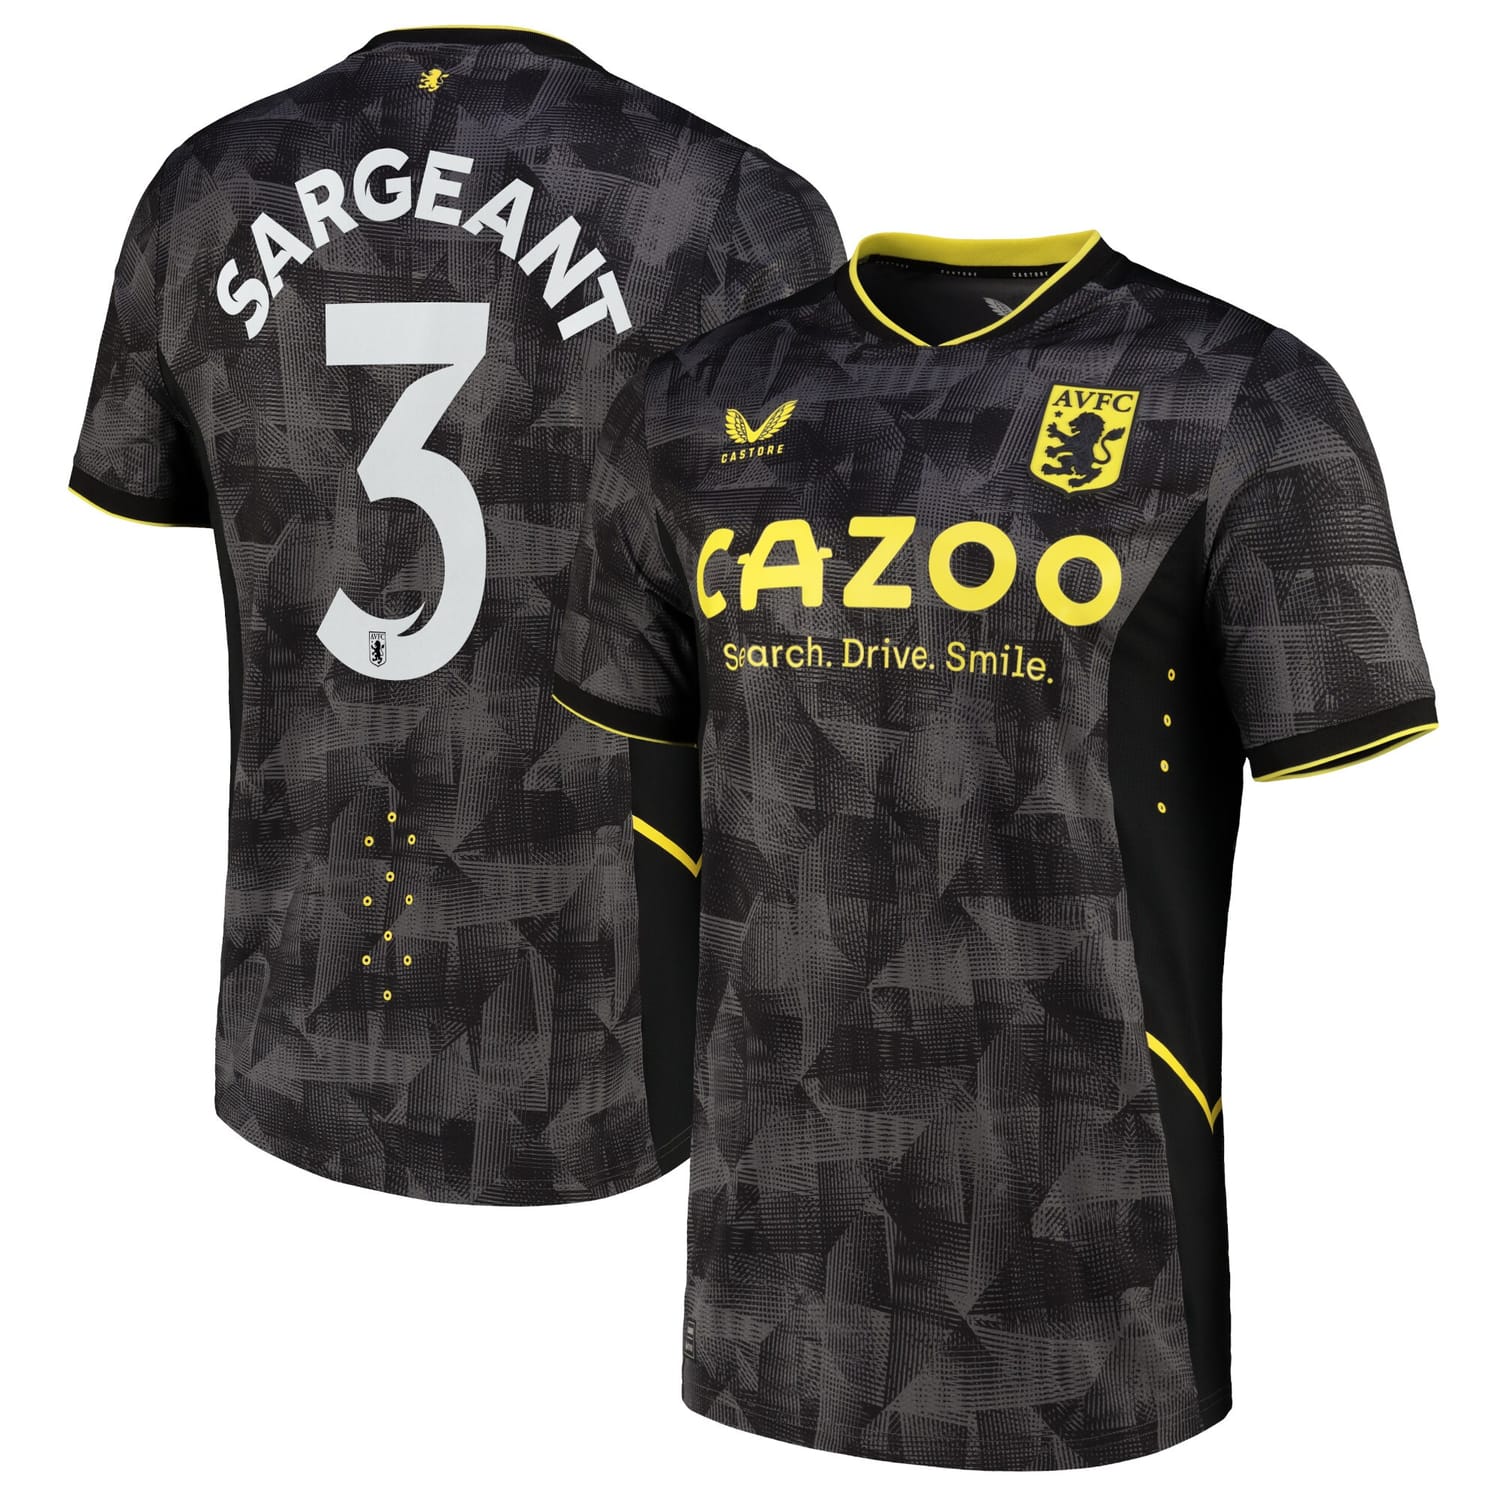 Premier League Aston Villa Third Cup Jersey Shirt 2022-23 player Meaghan Sargeant 3 printing for Men